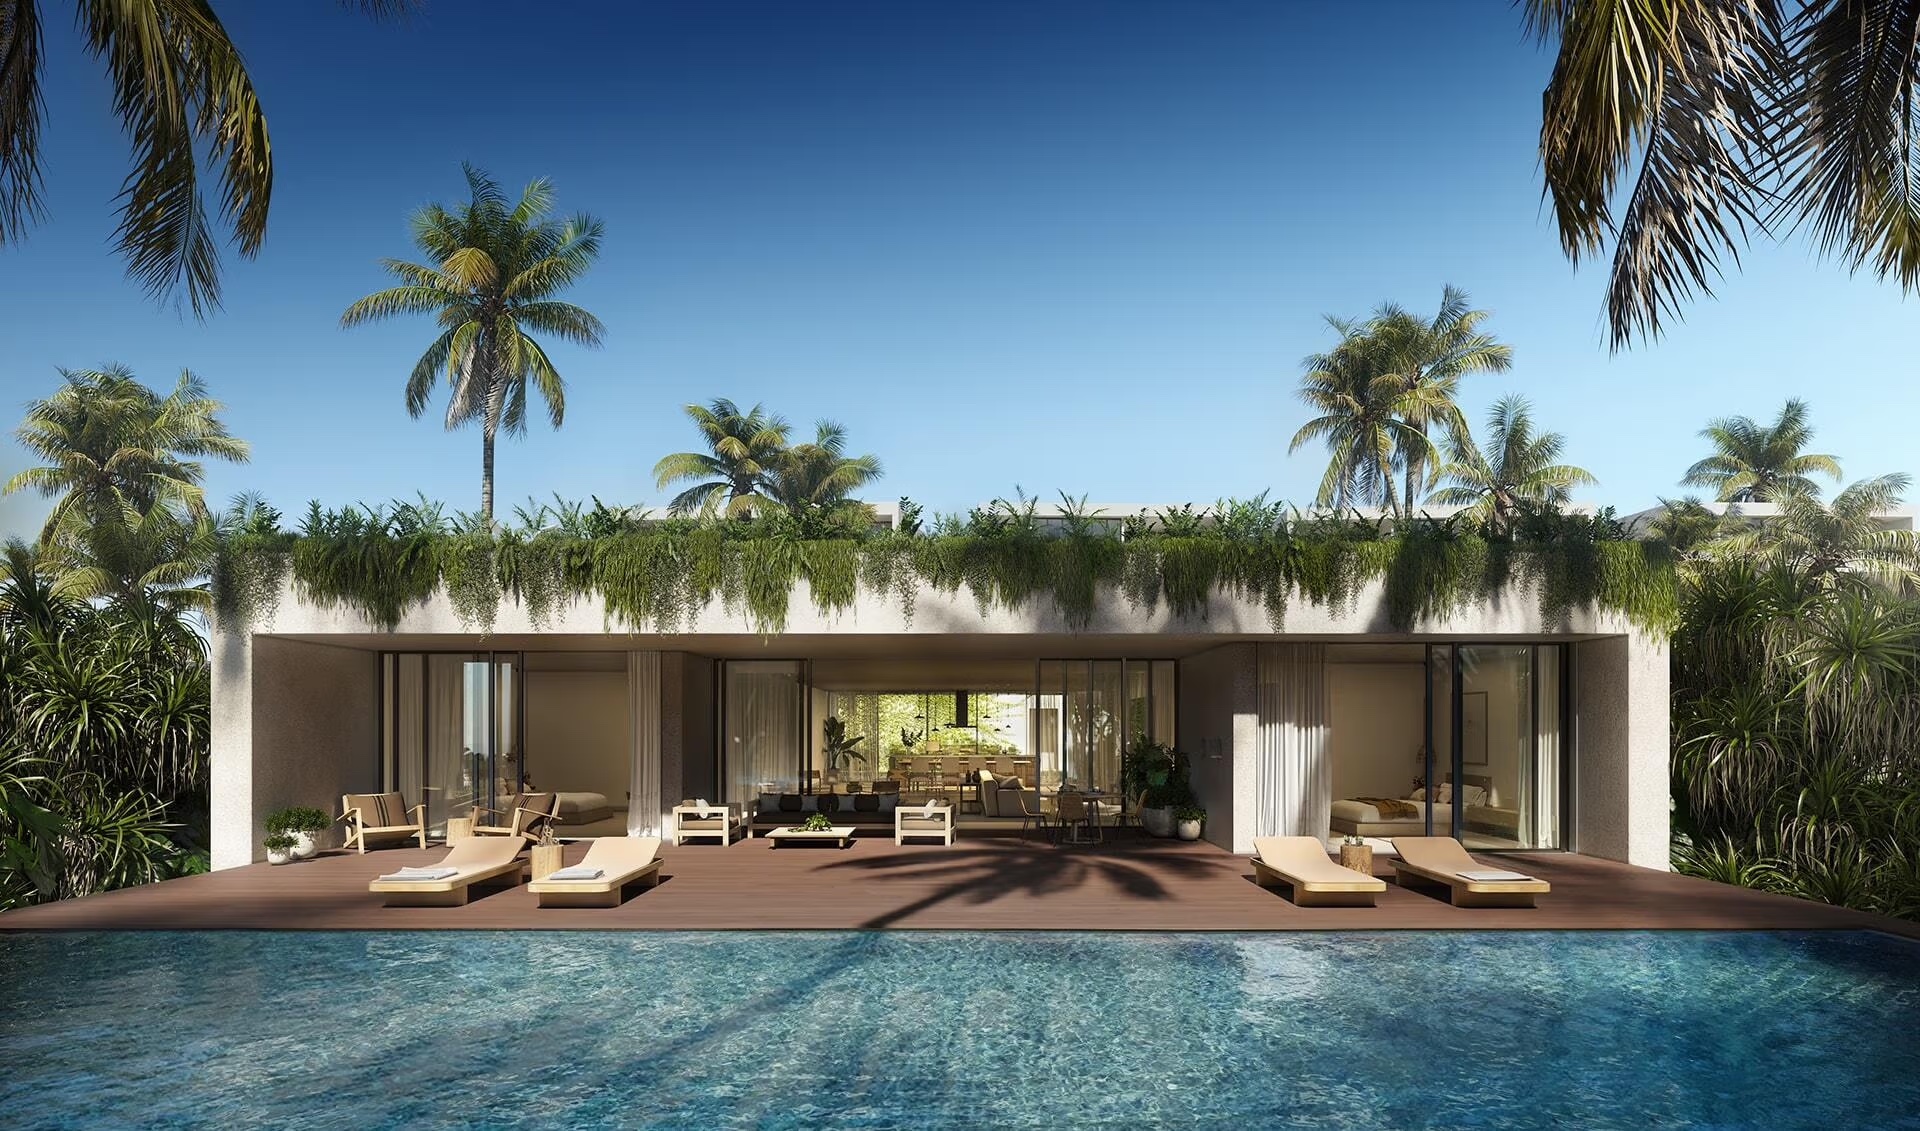 Inside Tropicalia: Four Seasons Private Residences in the Dominican Republic